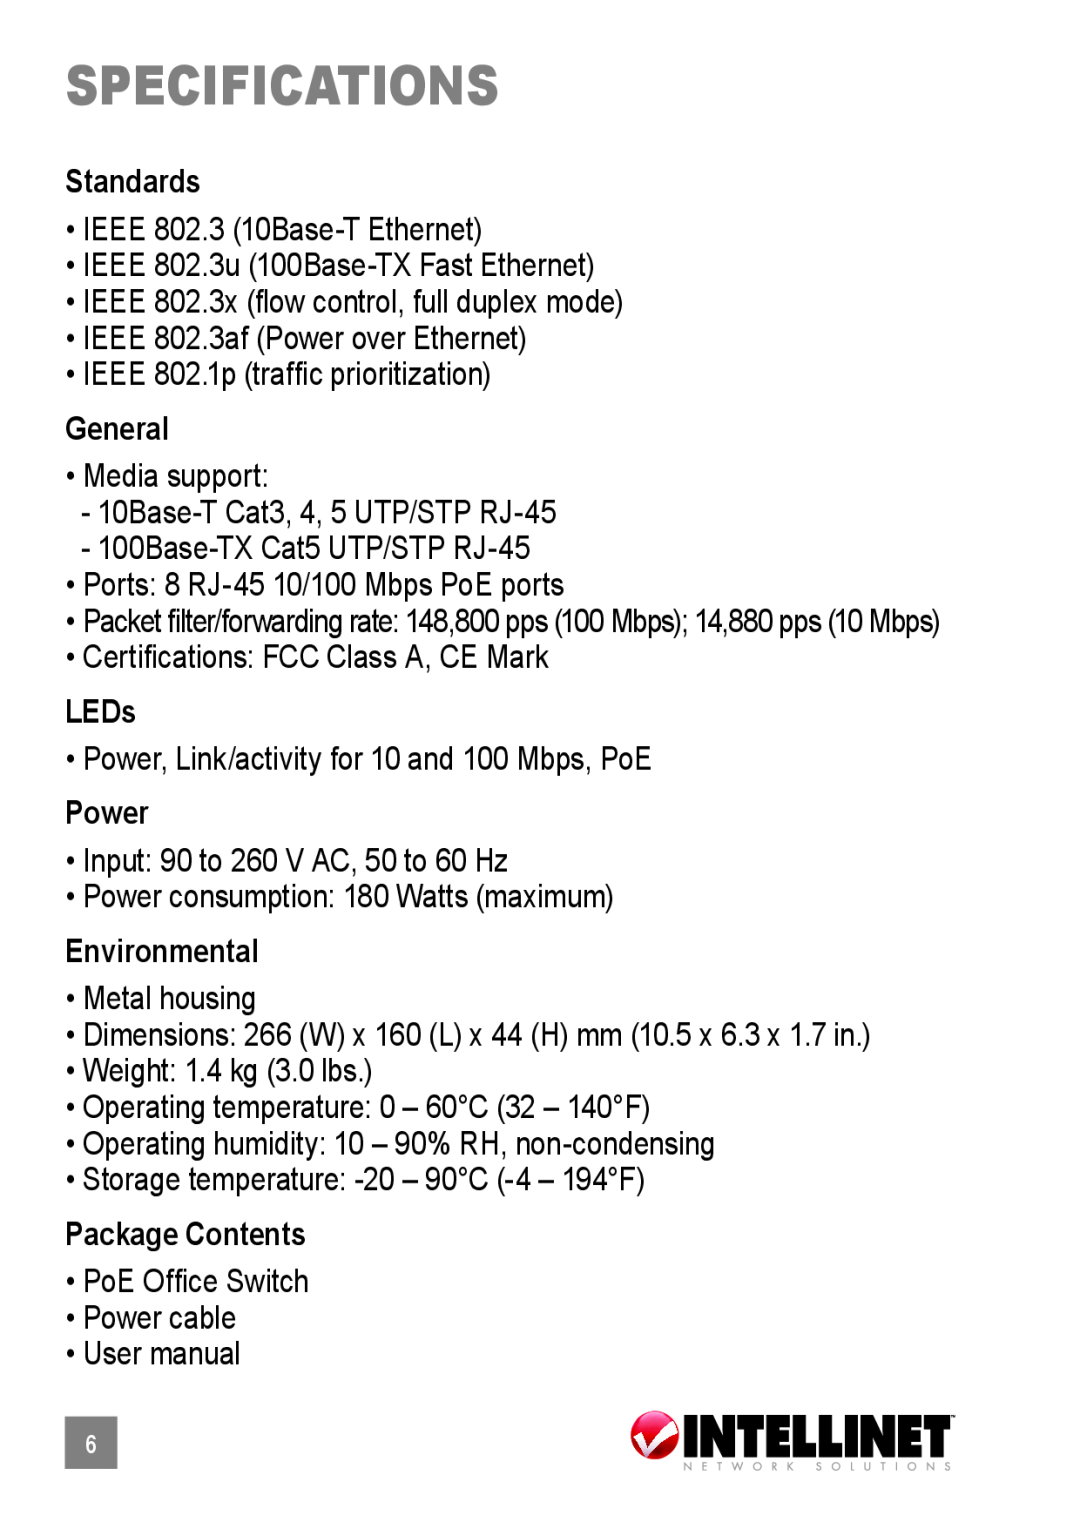 Intellinet Network Solutions 503358 specifications, Standards, General, Environmental, Package Contents, LEDs, Power 